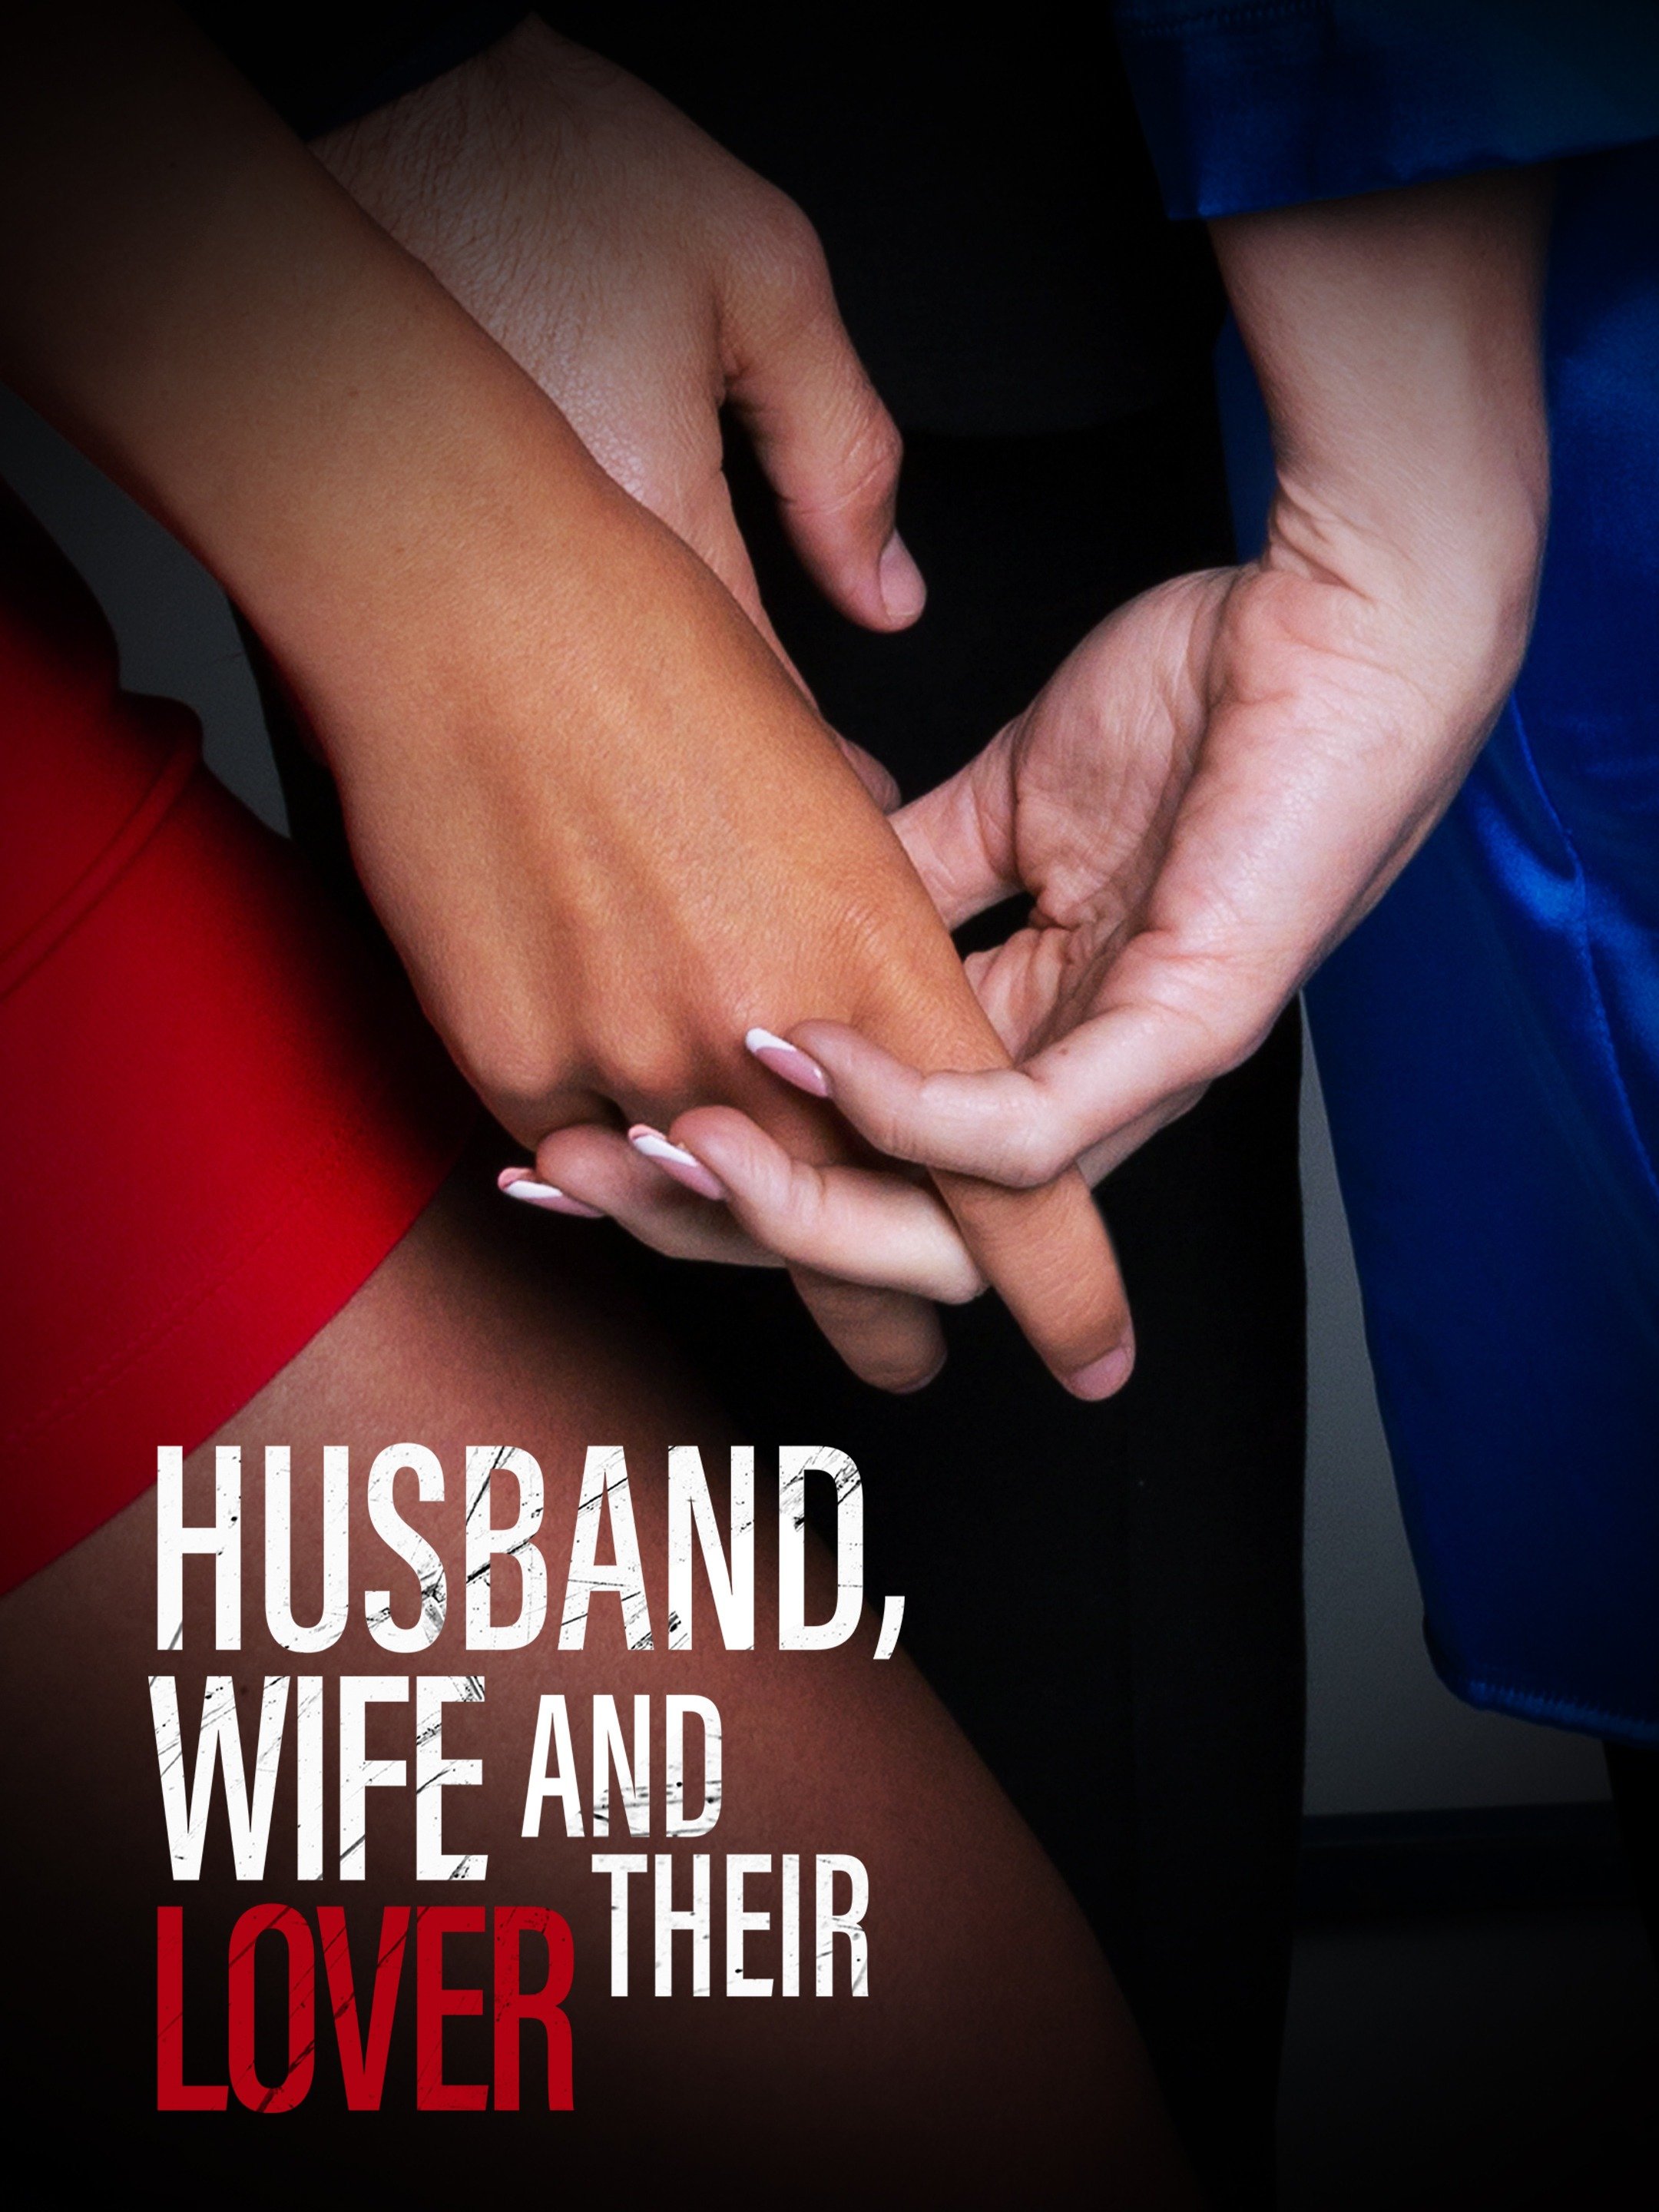 Husband wife and their lover 2022 full movie